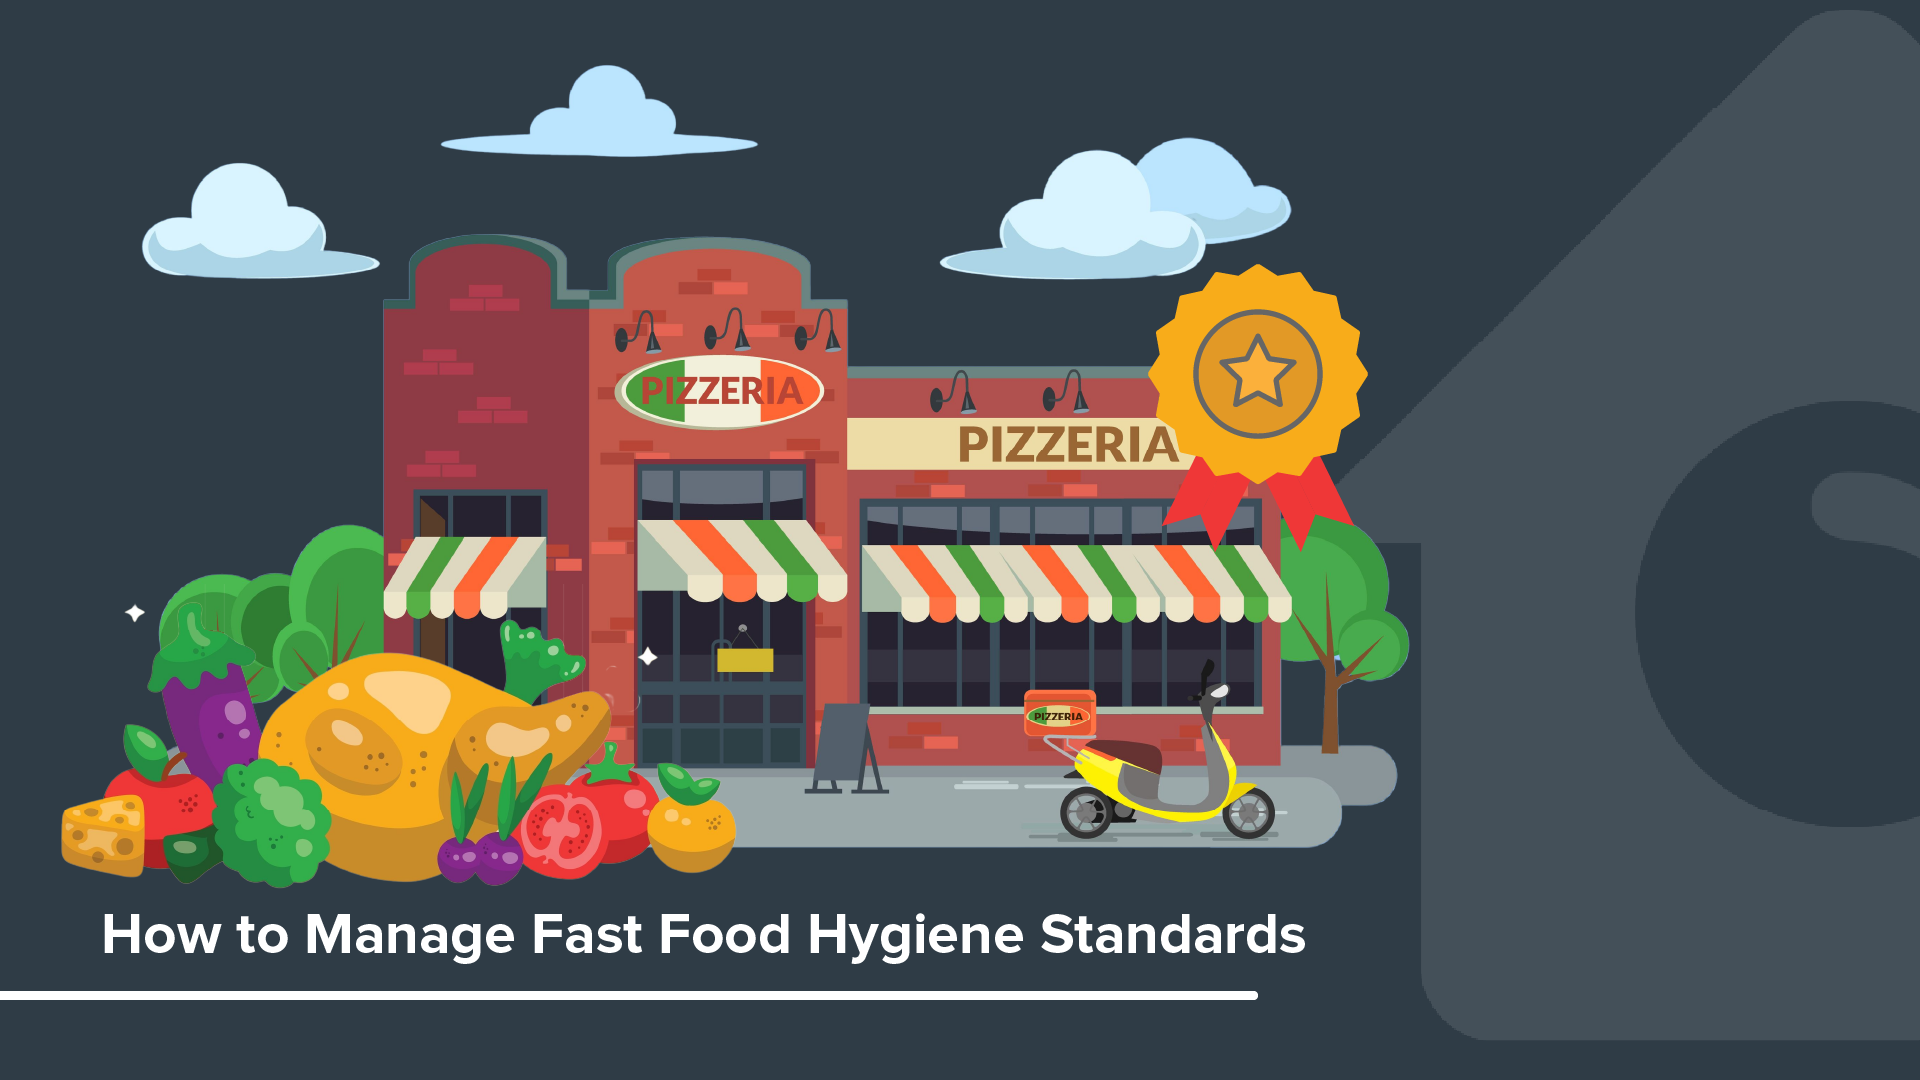 How to Manage Fast Food Safety Standards